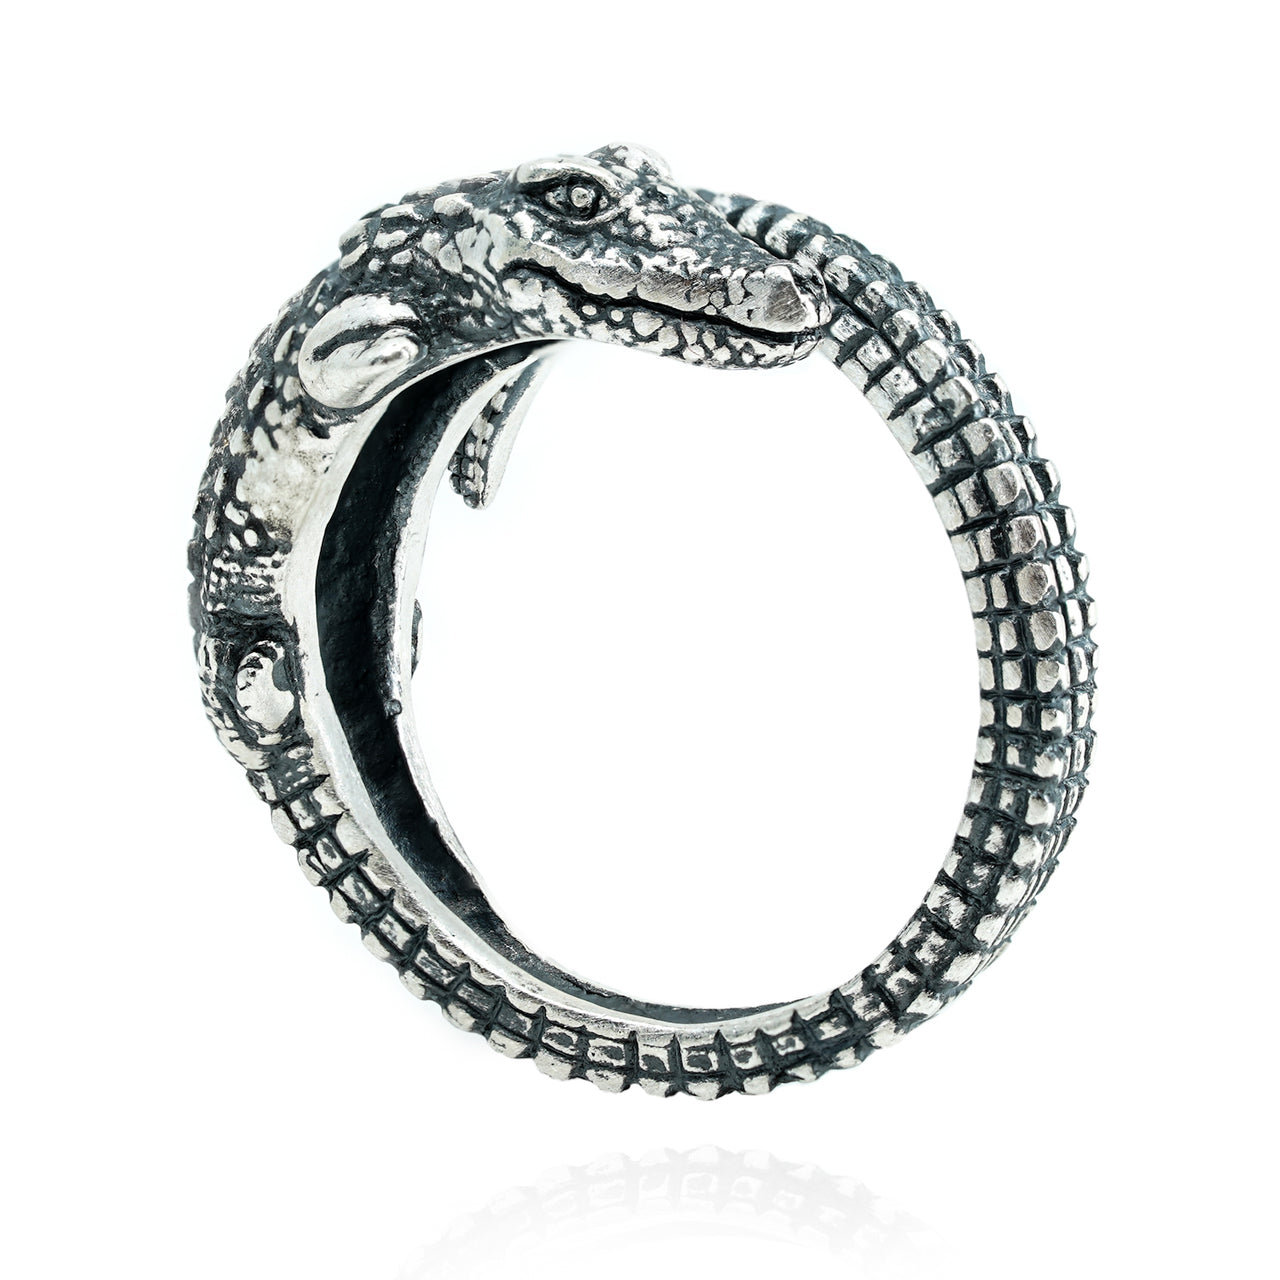 Wrapped Crocodile - 925 Sterling Silver by Black Feather Design on a white background